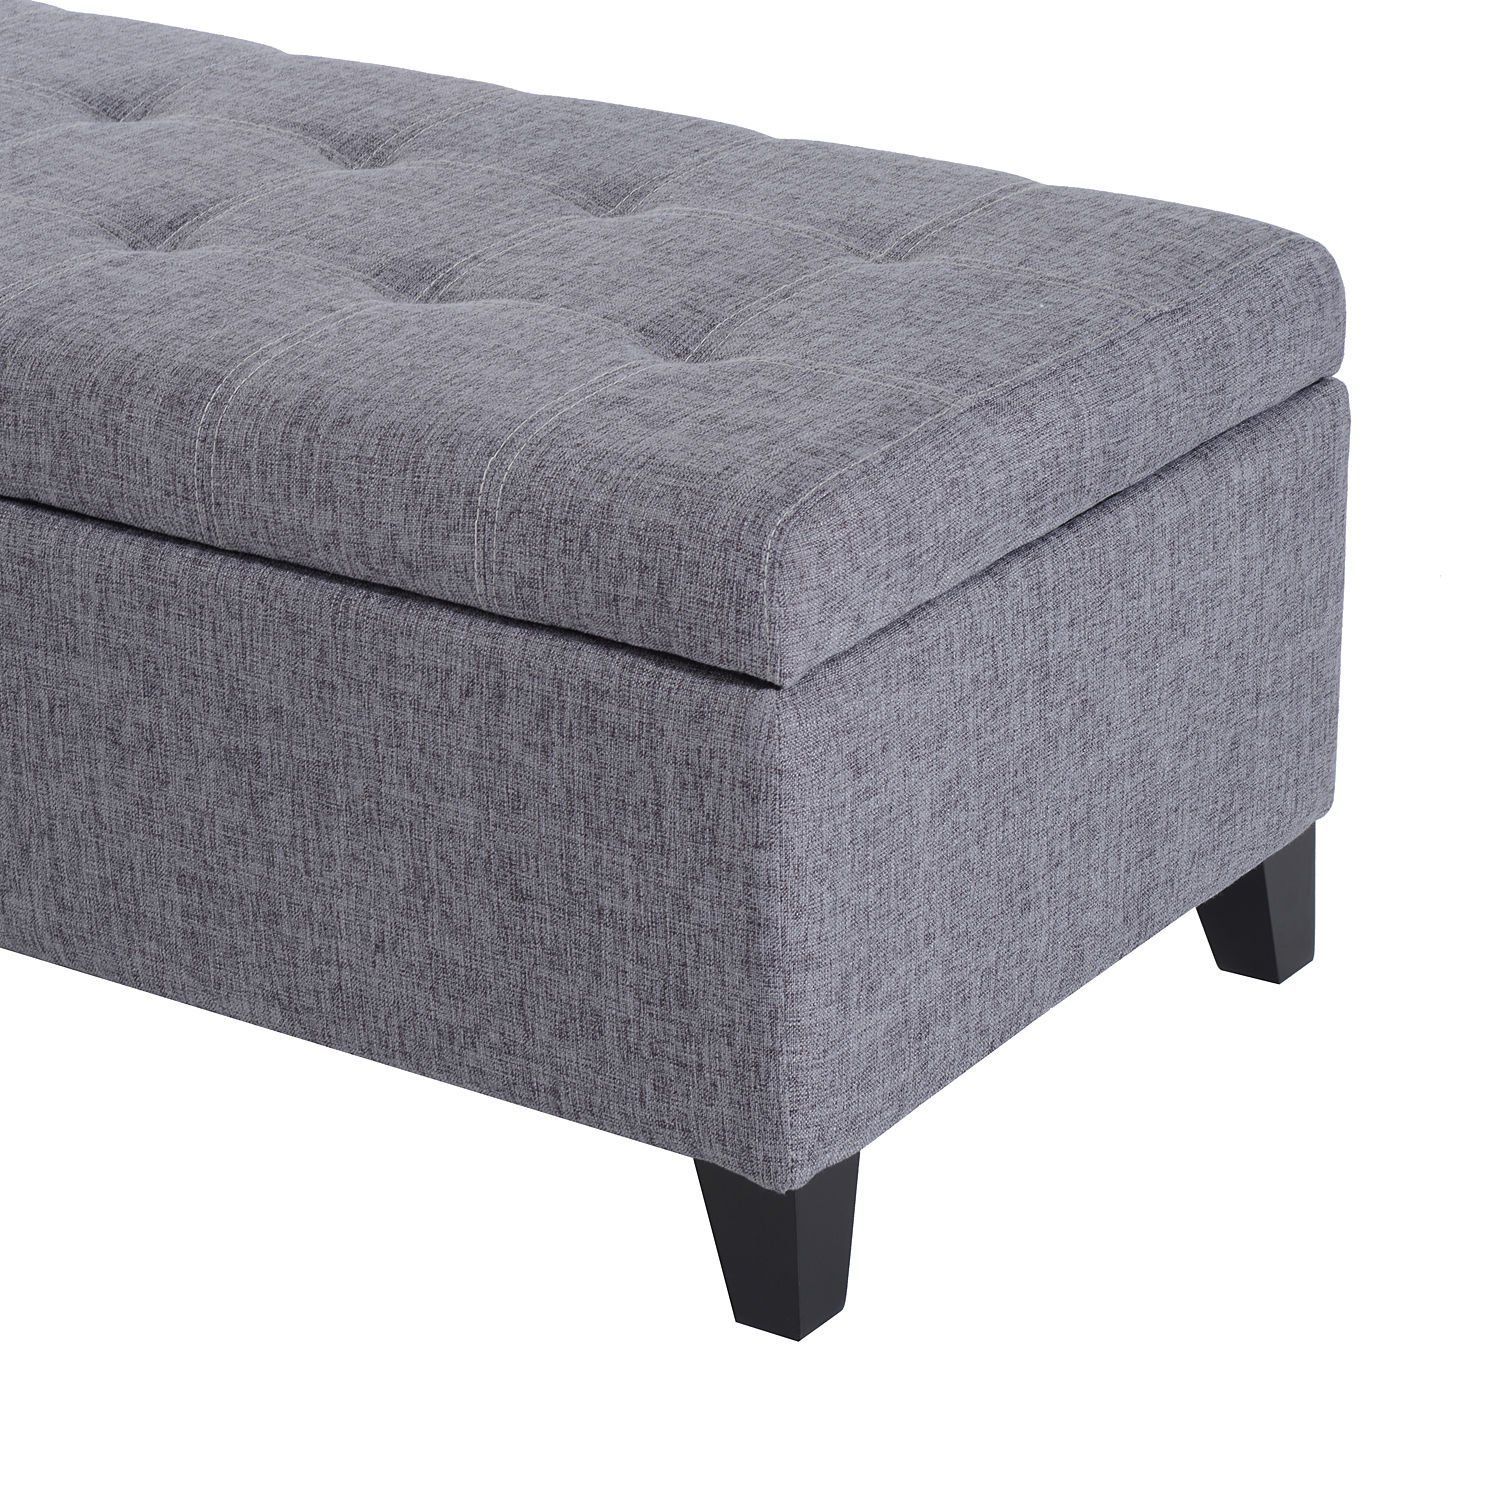 Homcom 51" Large Tufted Linen Fabric Ottoman Storage Bench With Soft For Snow Tufted Fabric Ottomans (View 3 of 20)